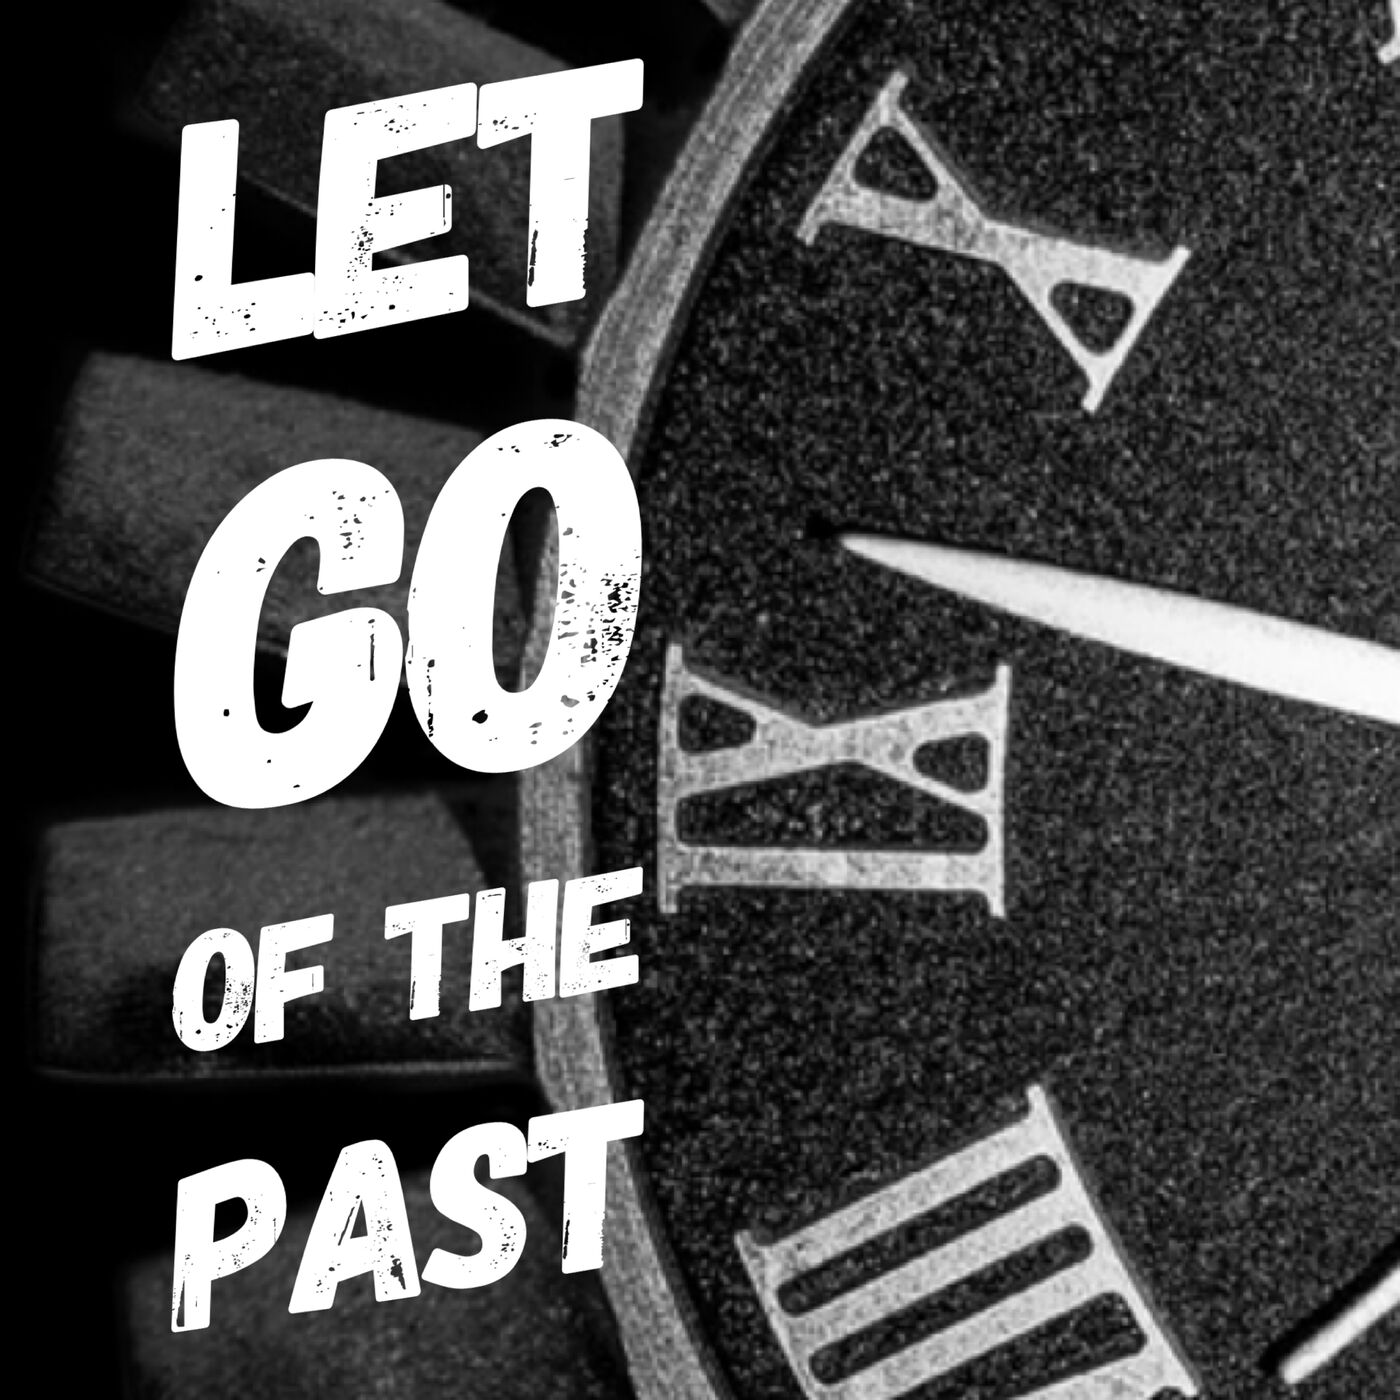 Let Go Of The Past